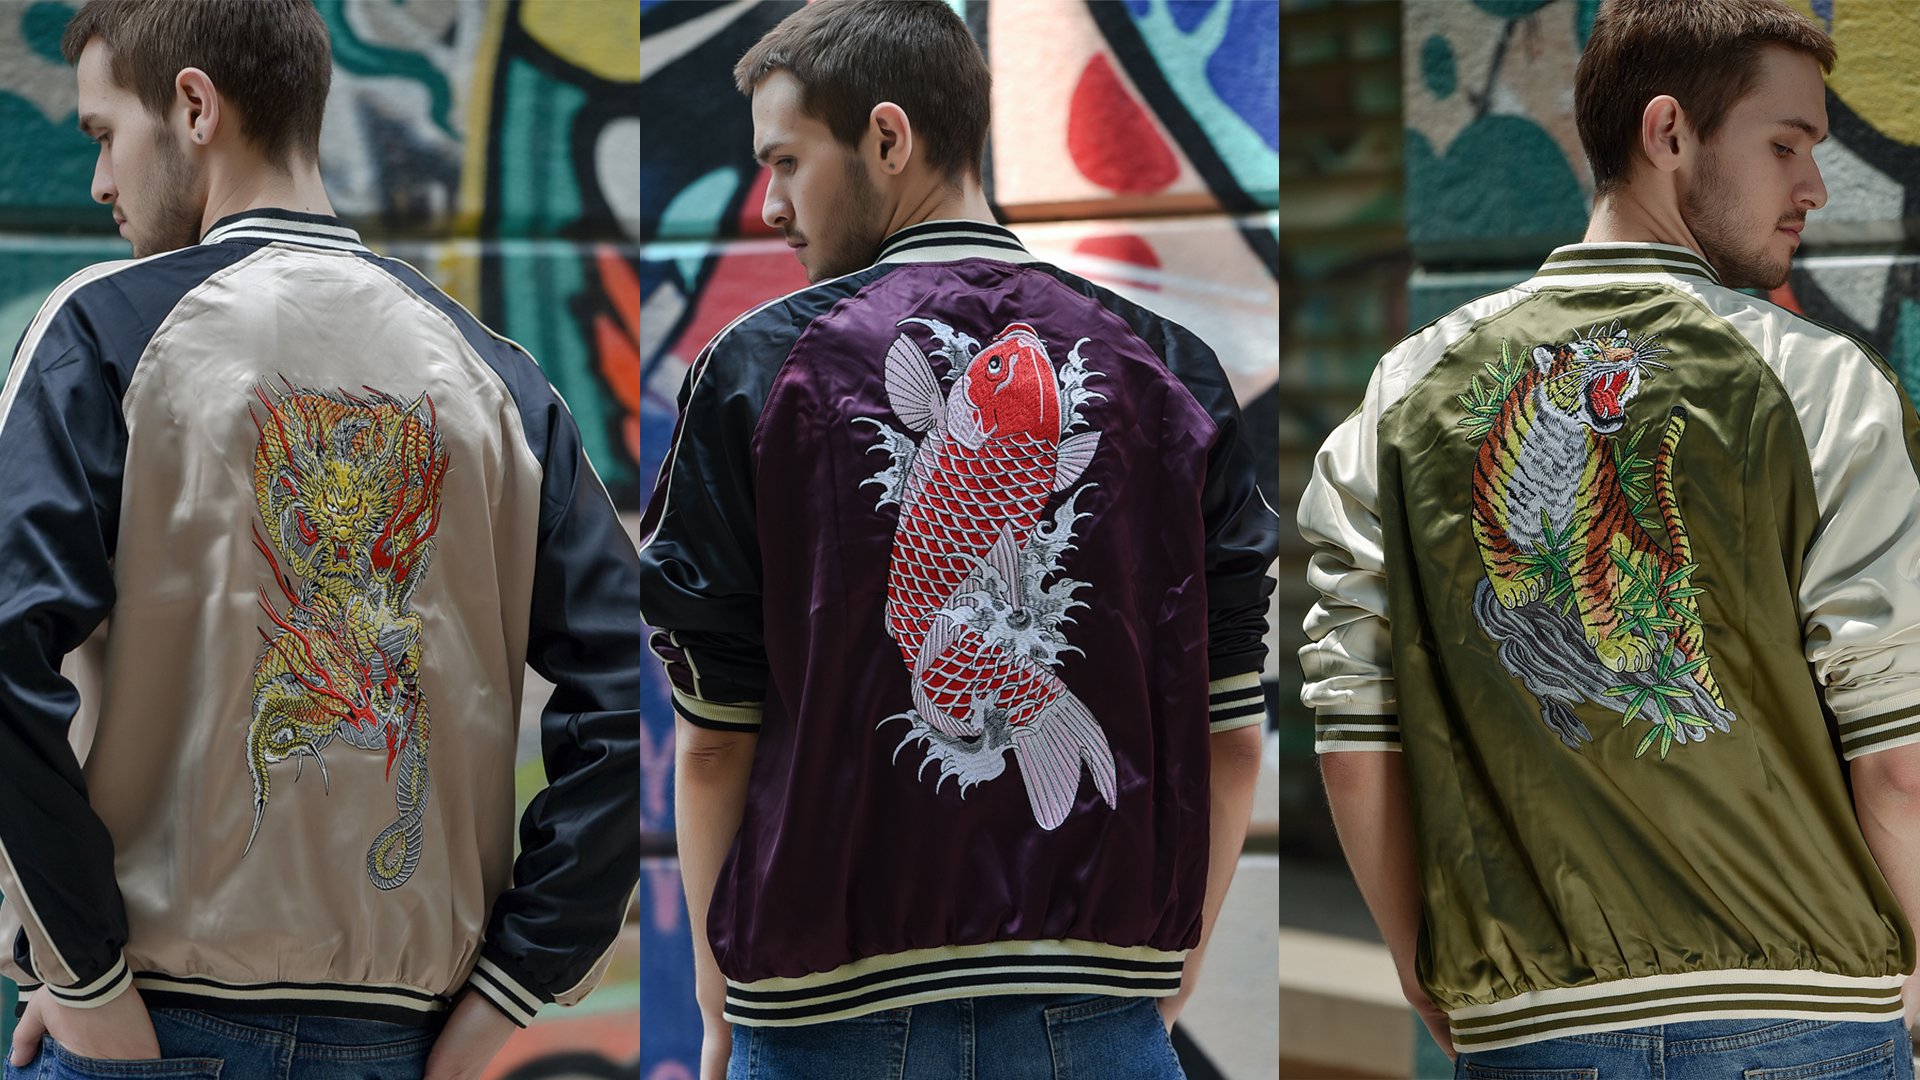 SEGA about getting a full body tattoo but want to show your love for Yakuza? Check out these awesome new Goda, Nishikiyama, and Saejima inspired jackets from our friends